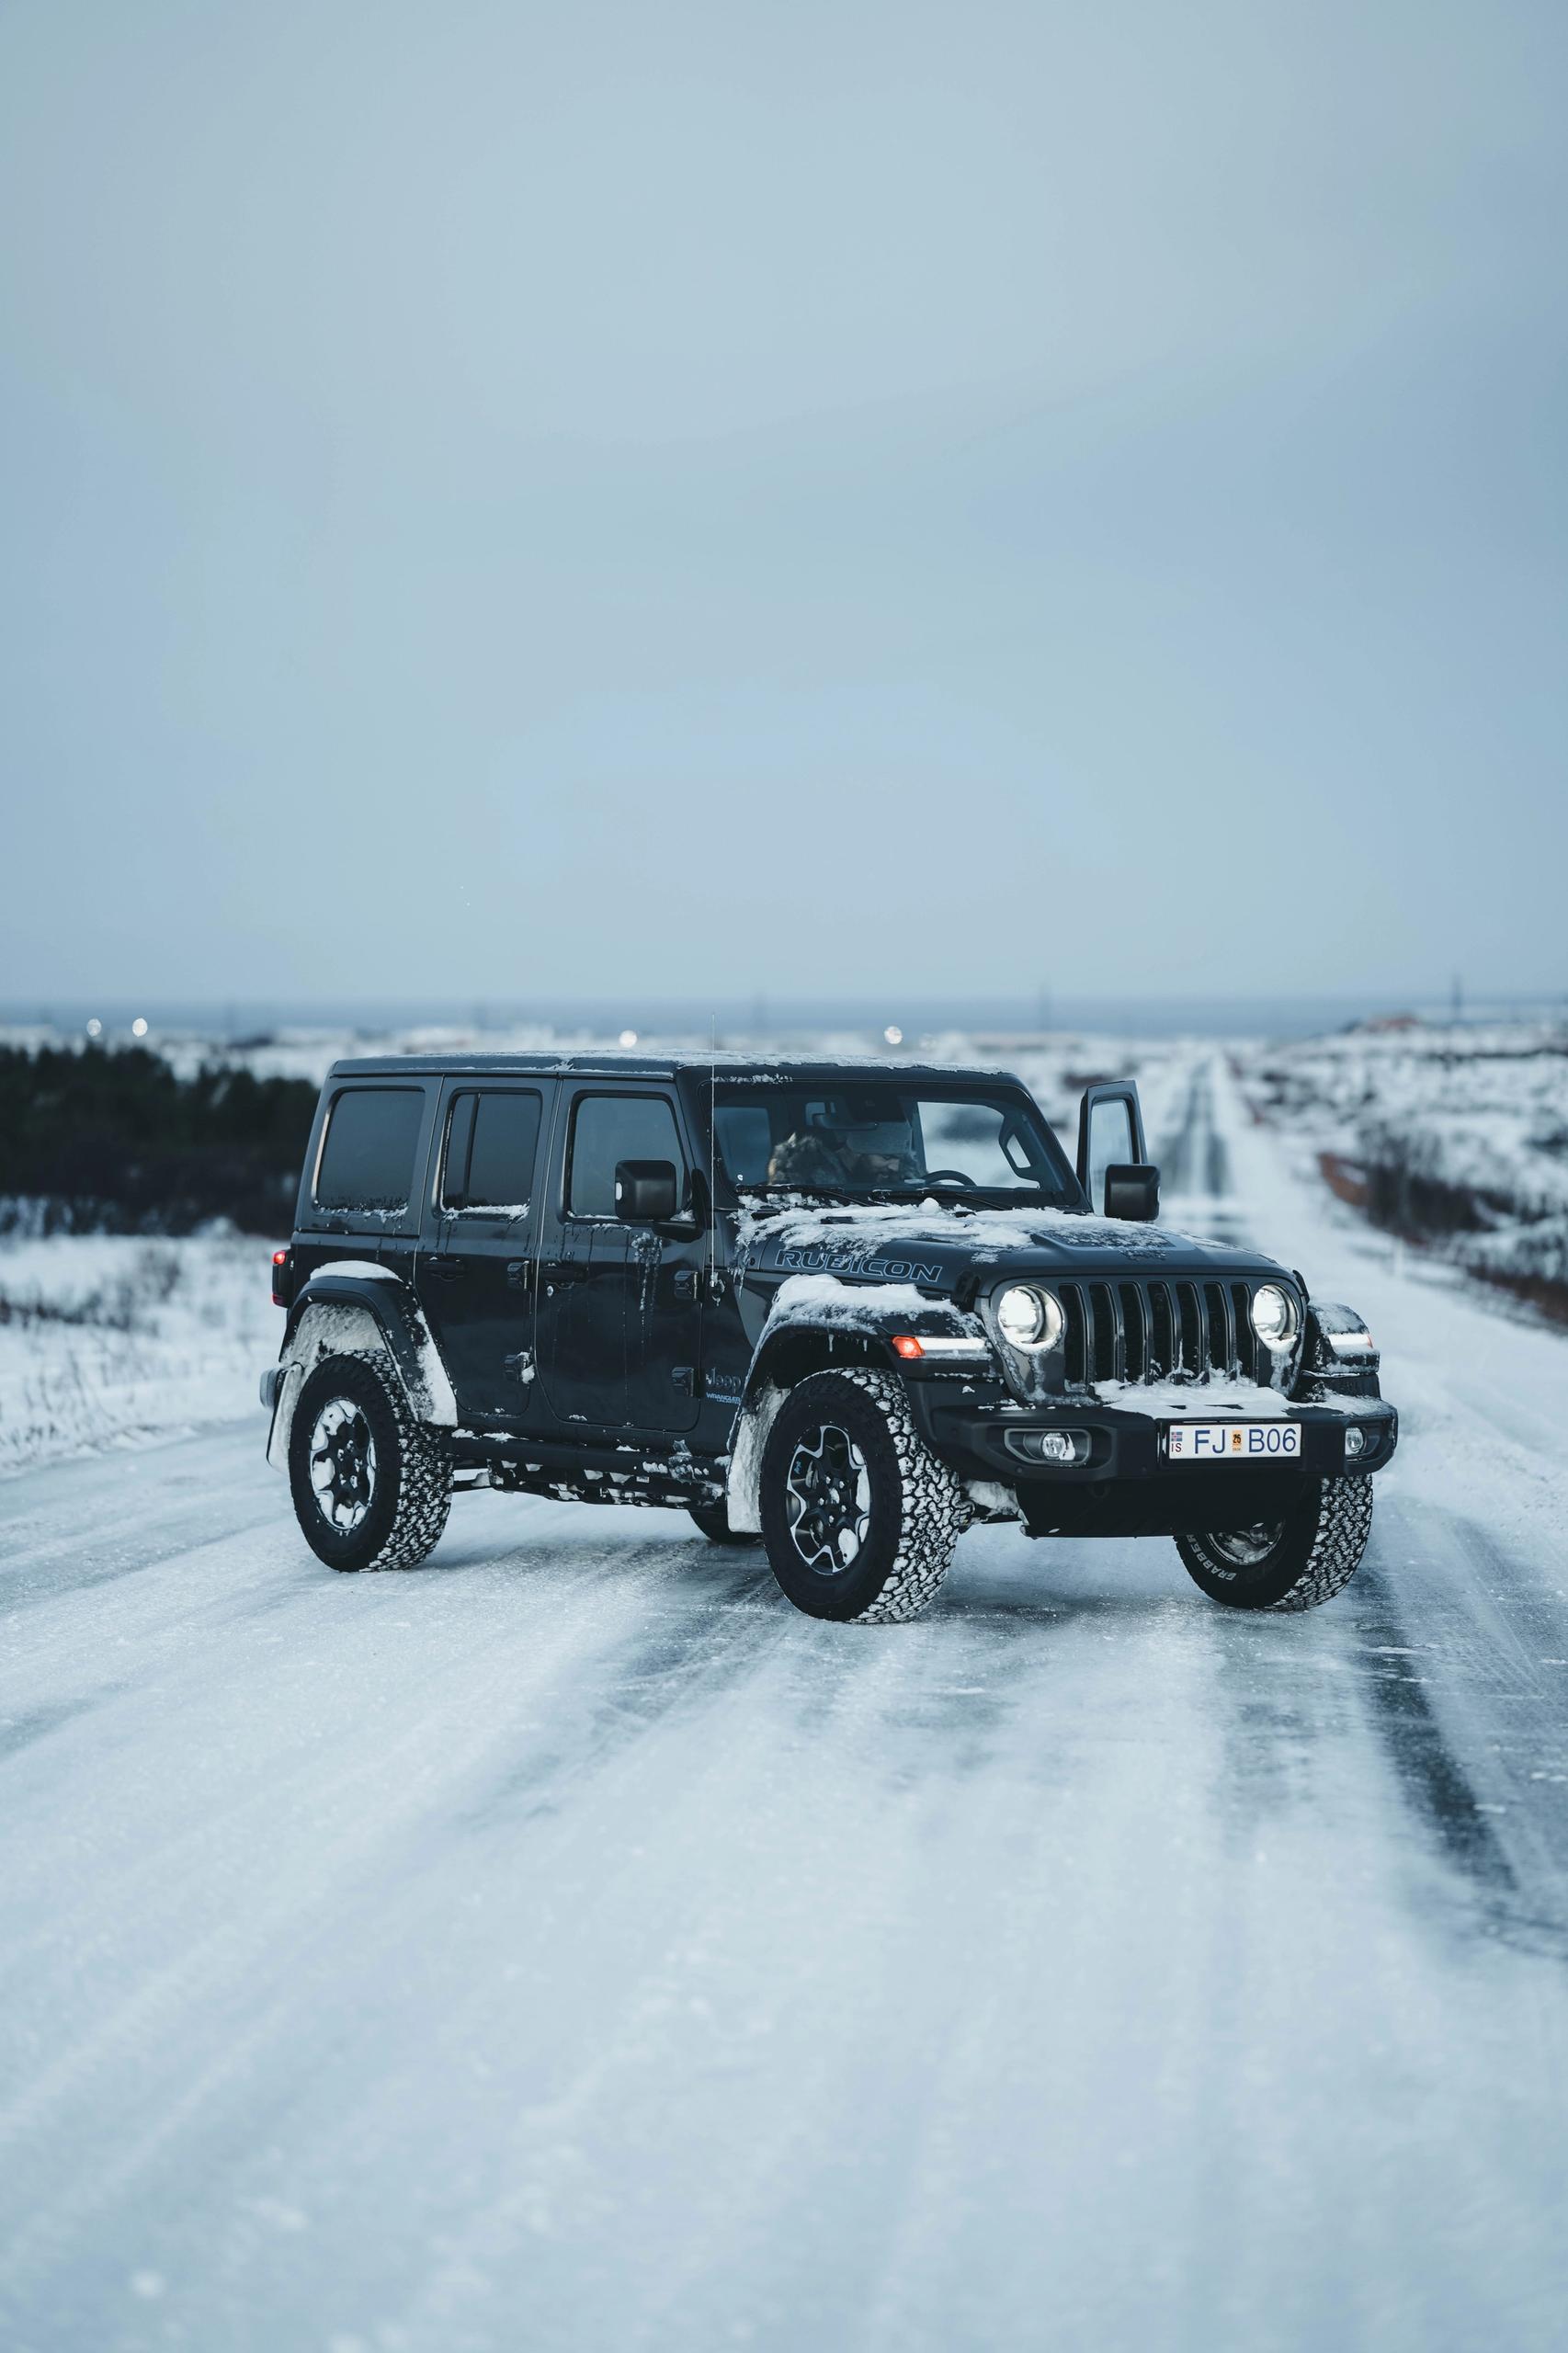 Jeep Wrangler 4x4 rental car iceland parked on a snowy road